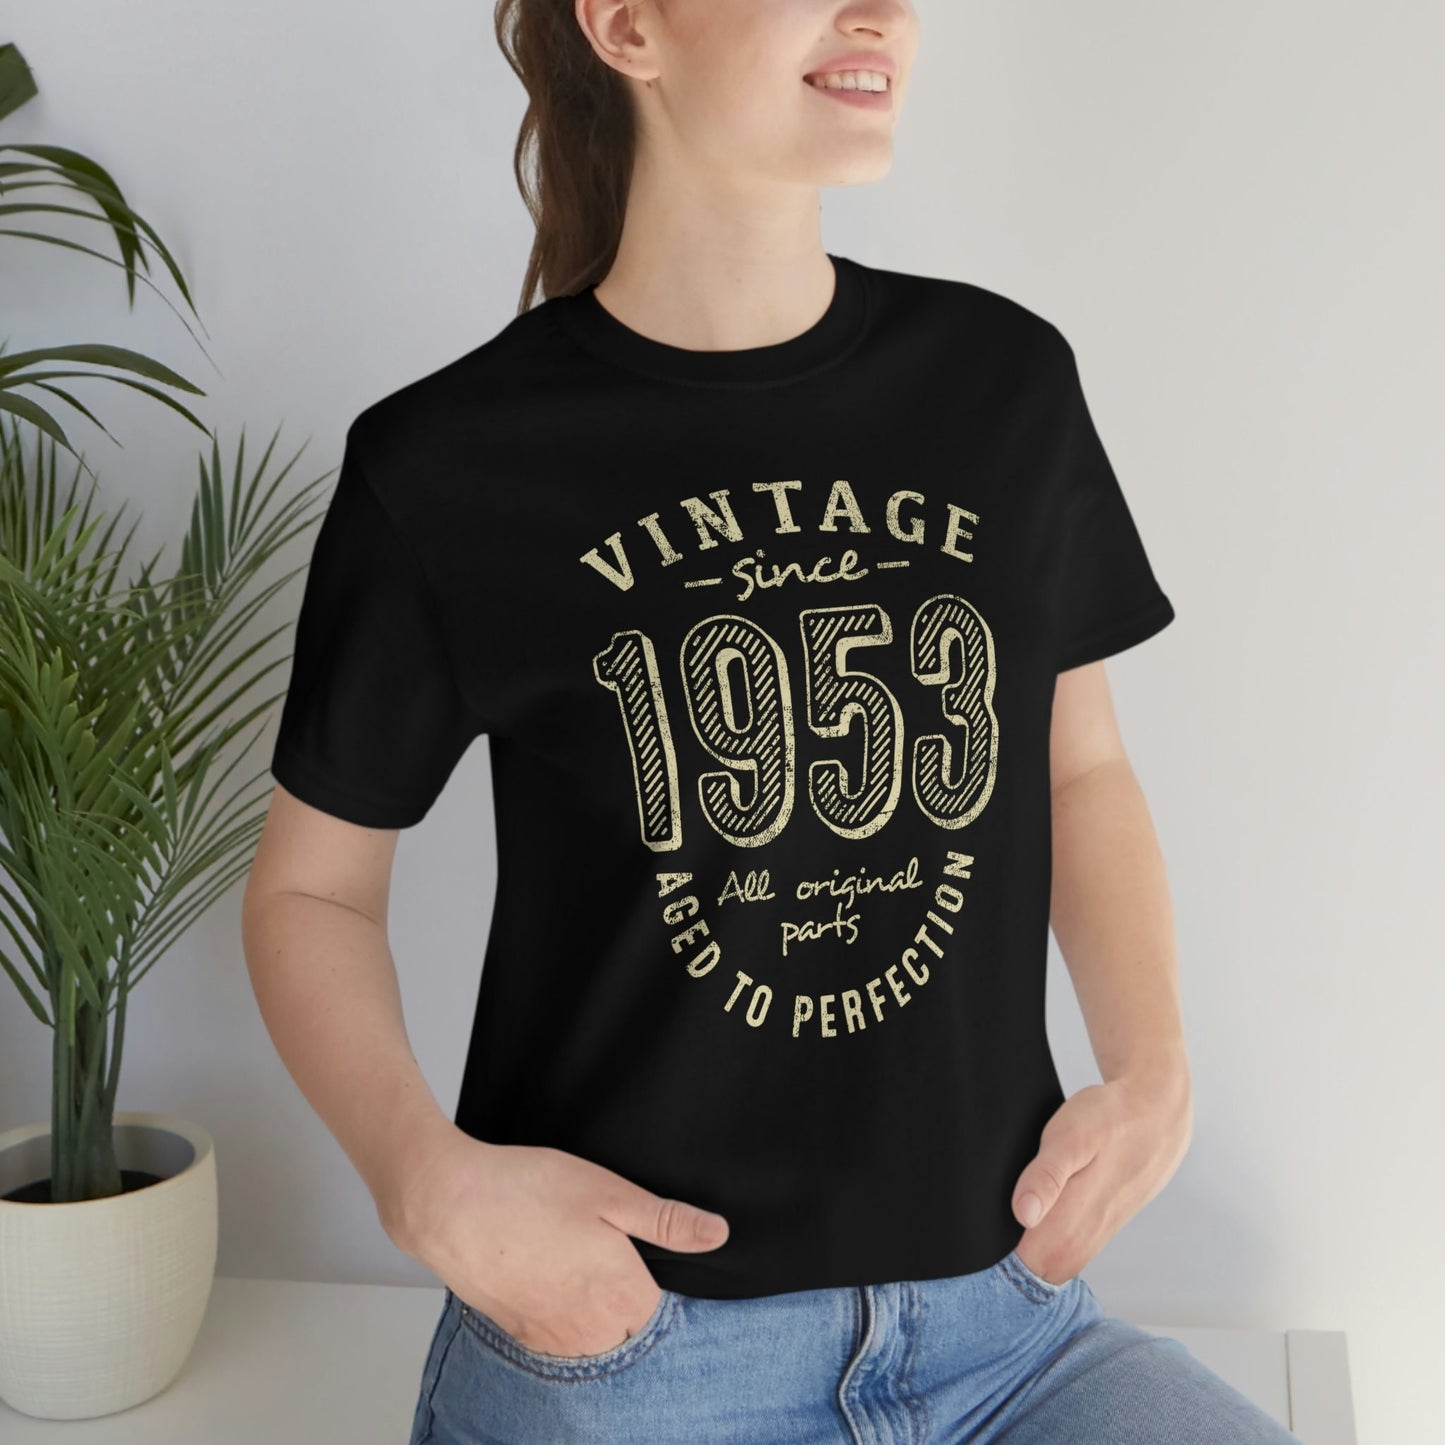 Vintage Since 1953 Birthday Shirt for Women or Men, Gift shirt for Wife or Husband